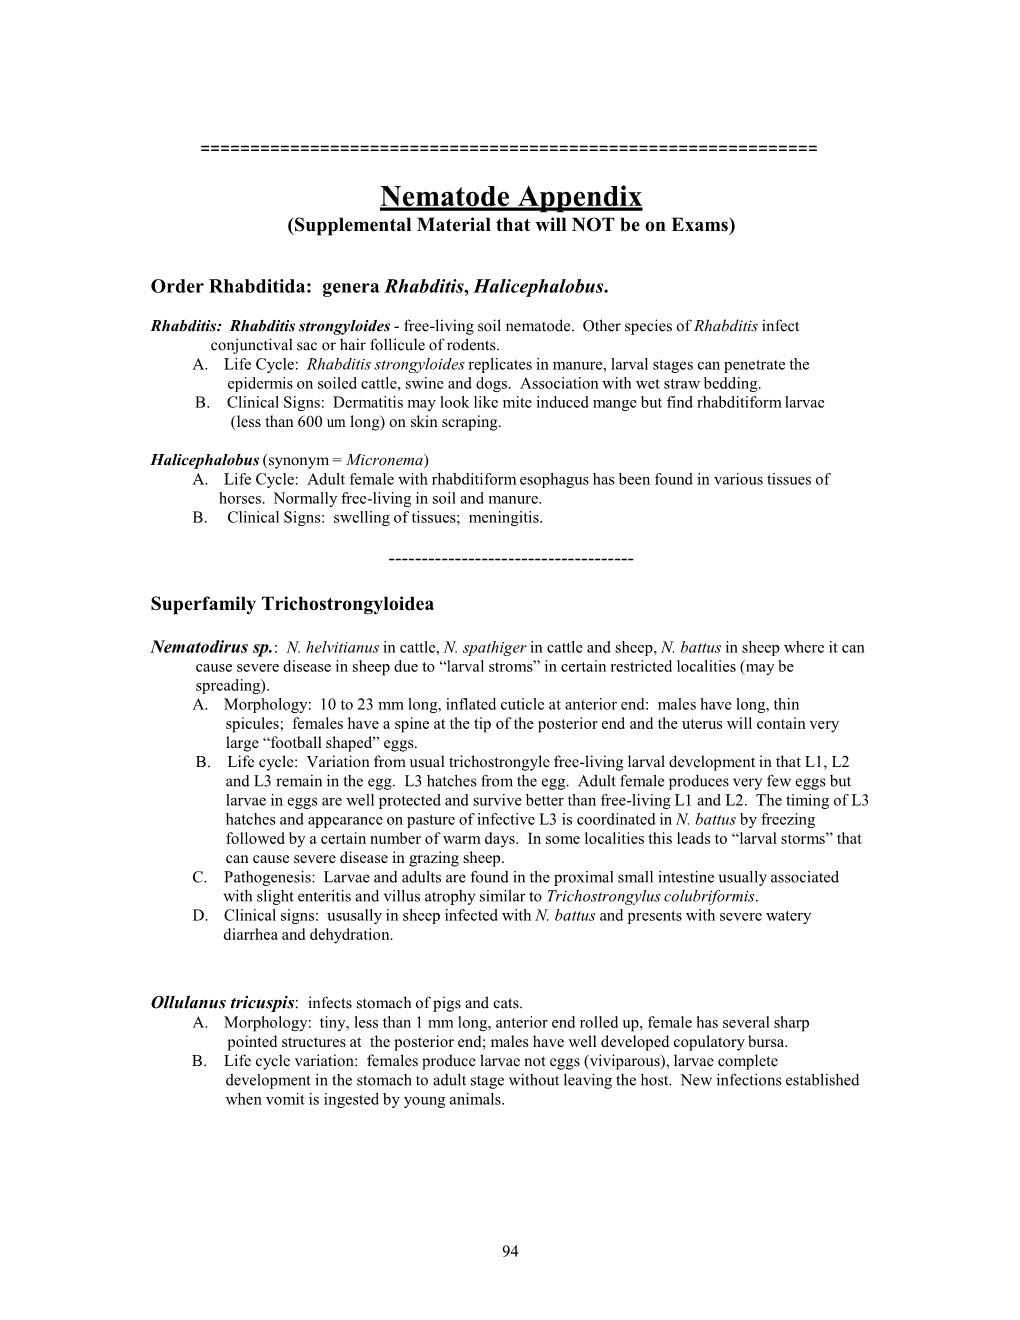 Nematode Appendix (Supplemental Material That Will NOT Be on Exams)